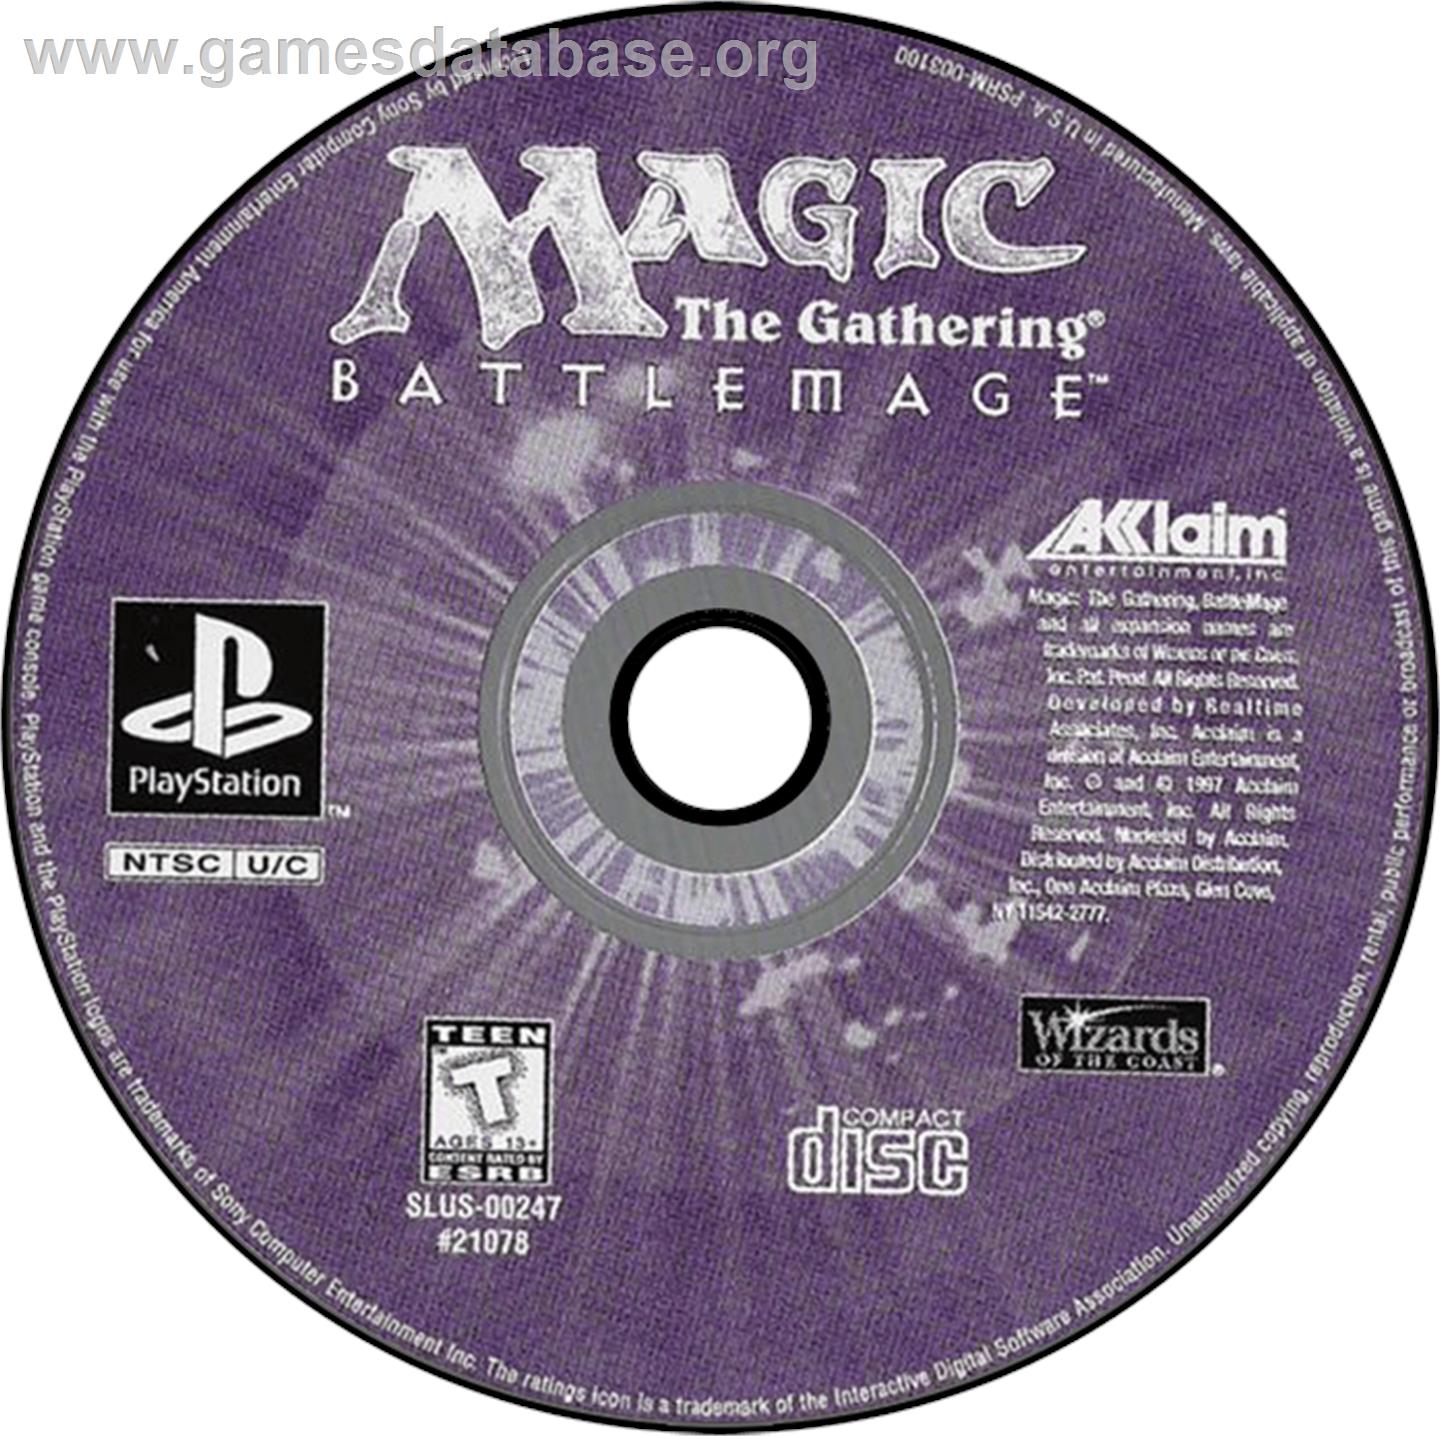 Magic: The Gathering - Battlemage - Sony Playstation - Artwork - Disc